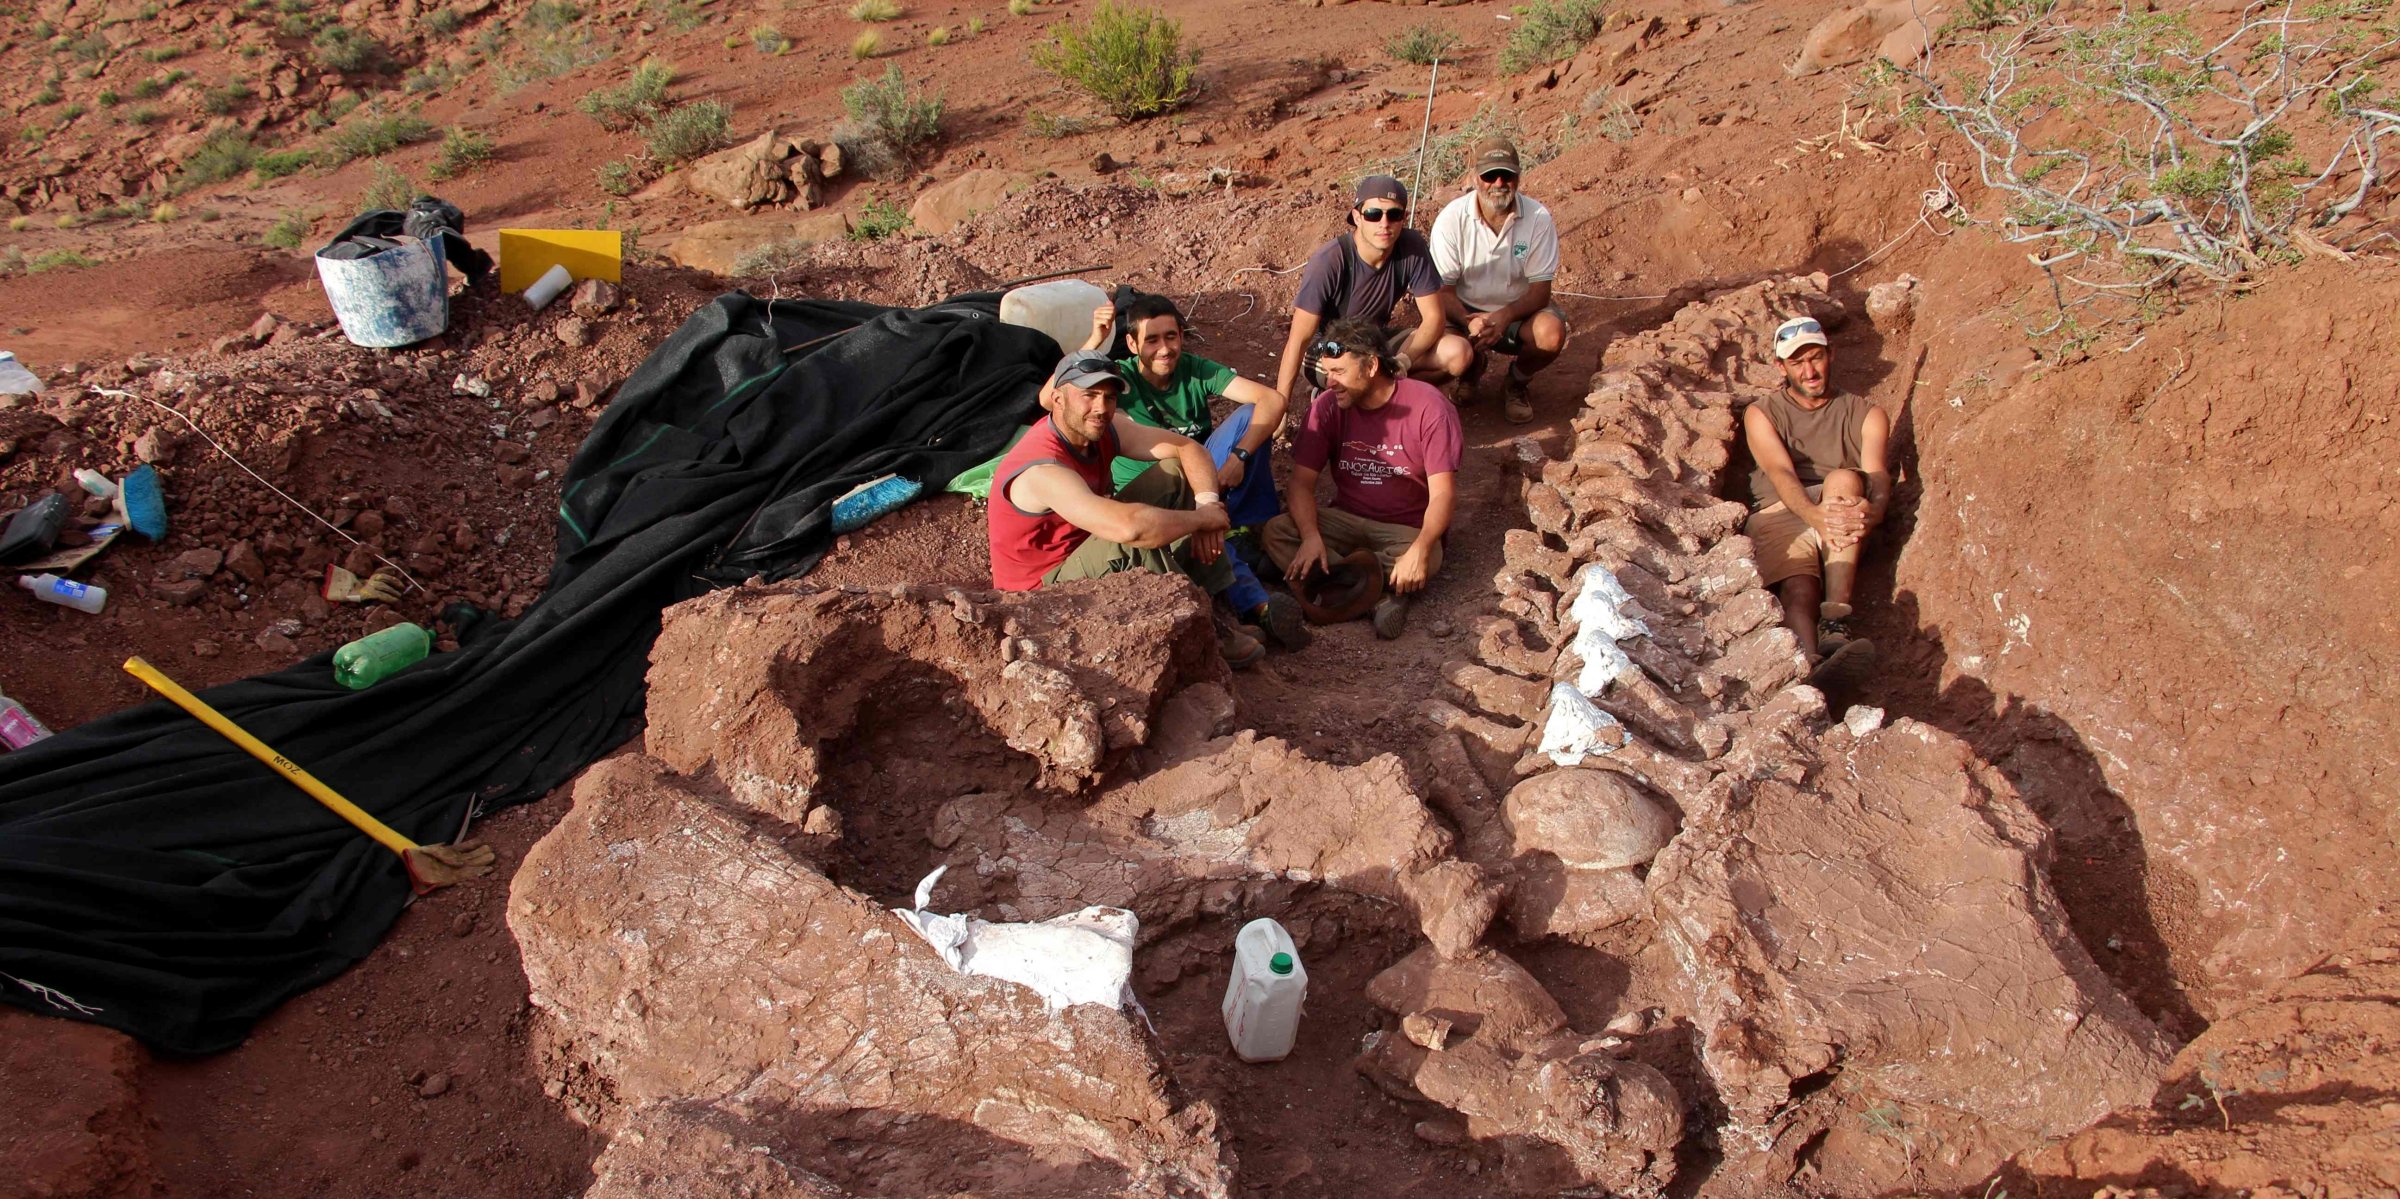 A dinosaur found in Argentina was the largest find ever